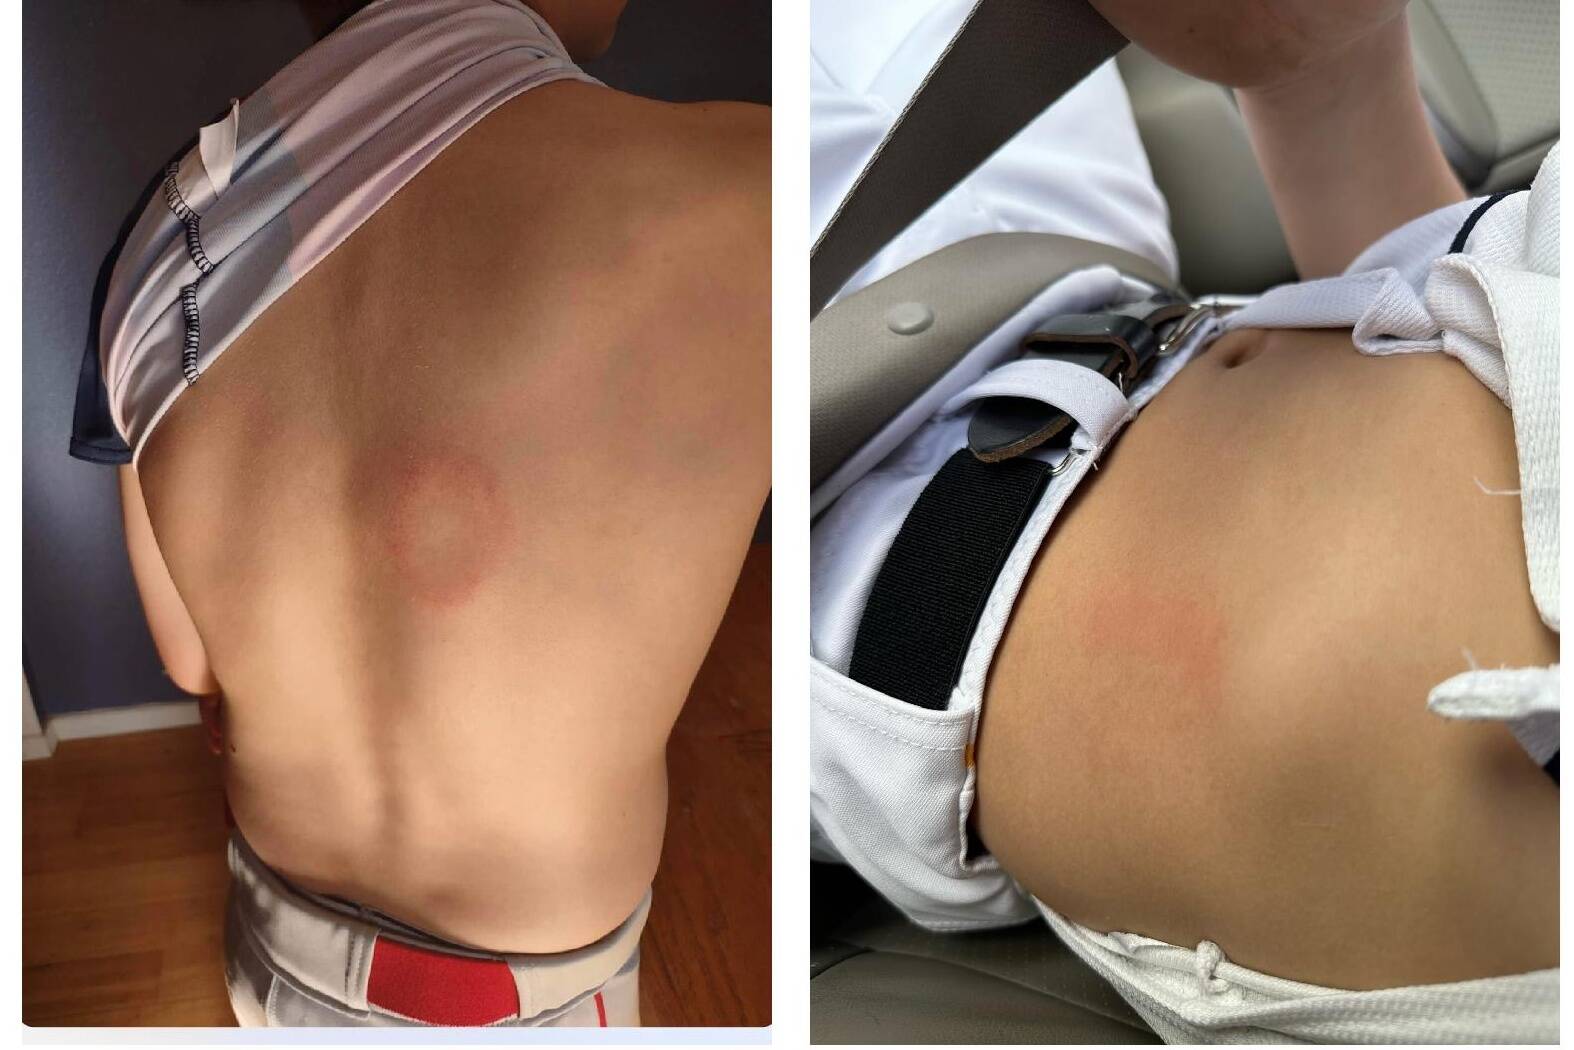 These photos show bruises on Rainier Middle School players. (Courtesy of Auburn Police Department)